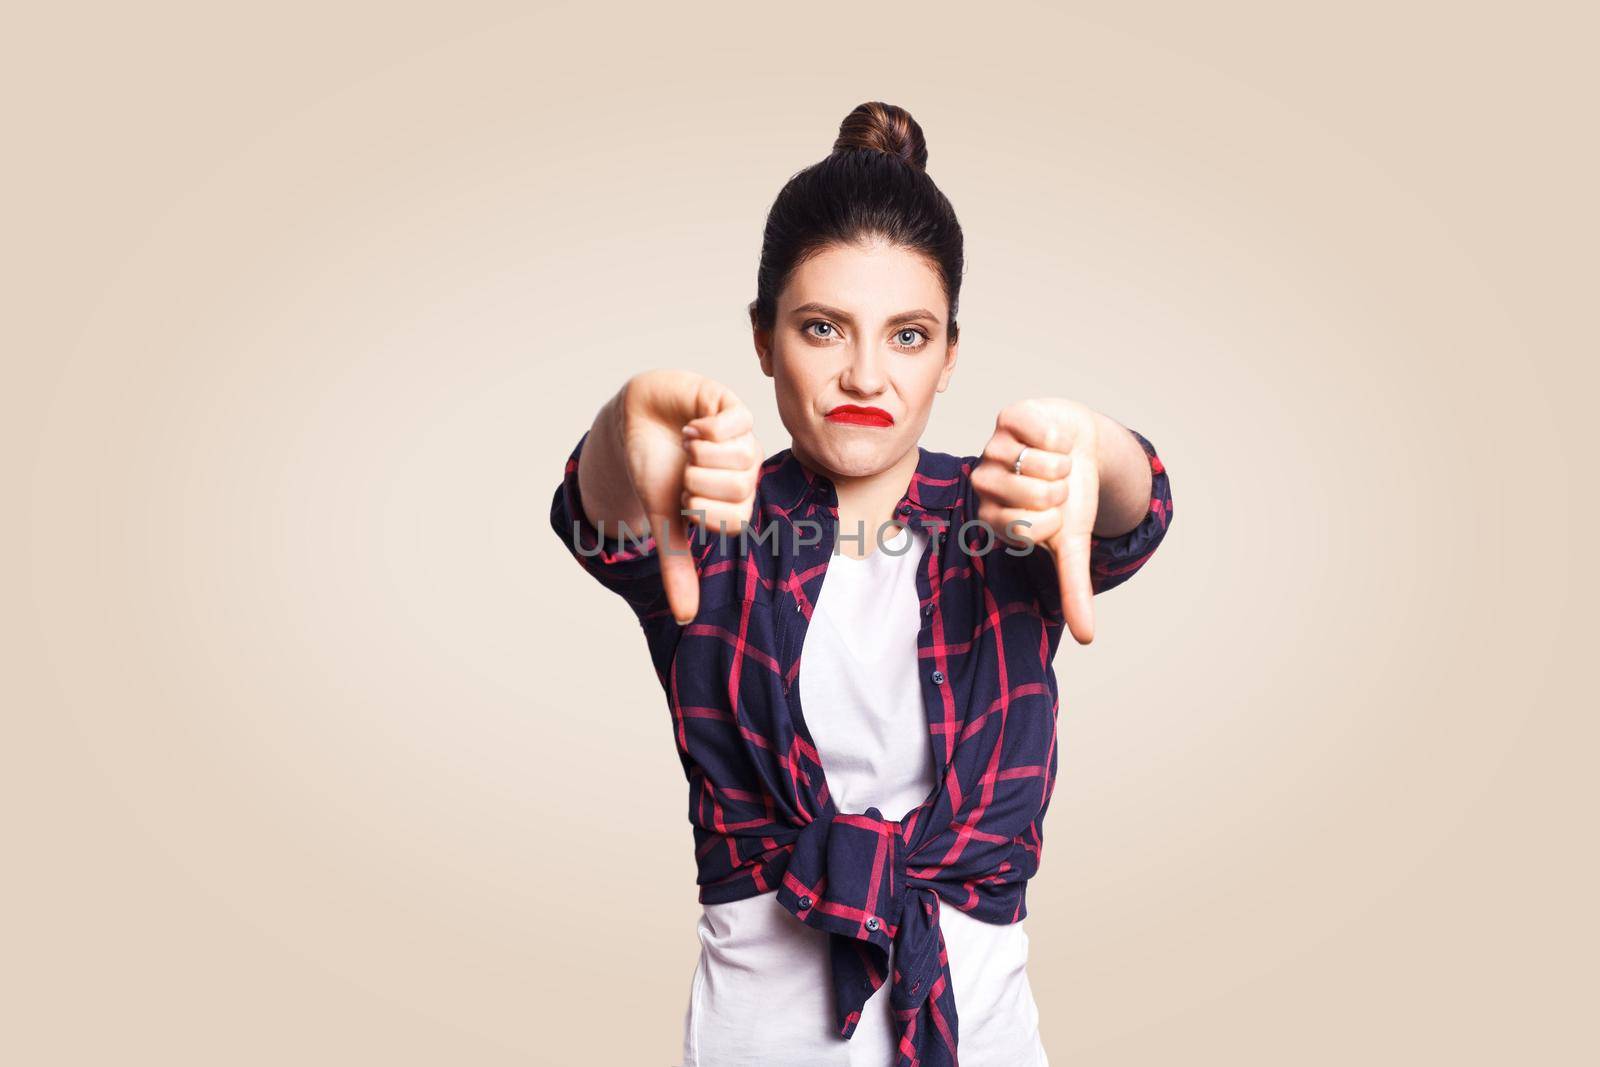 Dislike. Young unhappy upset girl with casual style and bun hair thumbs down her finger, on beige blank wall with copy space looking at camera with toothy smile. focus on face.